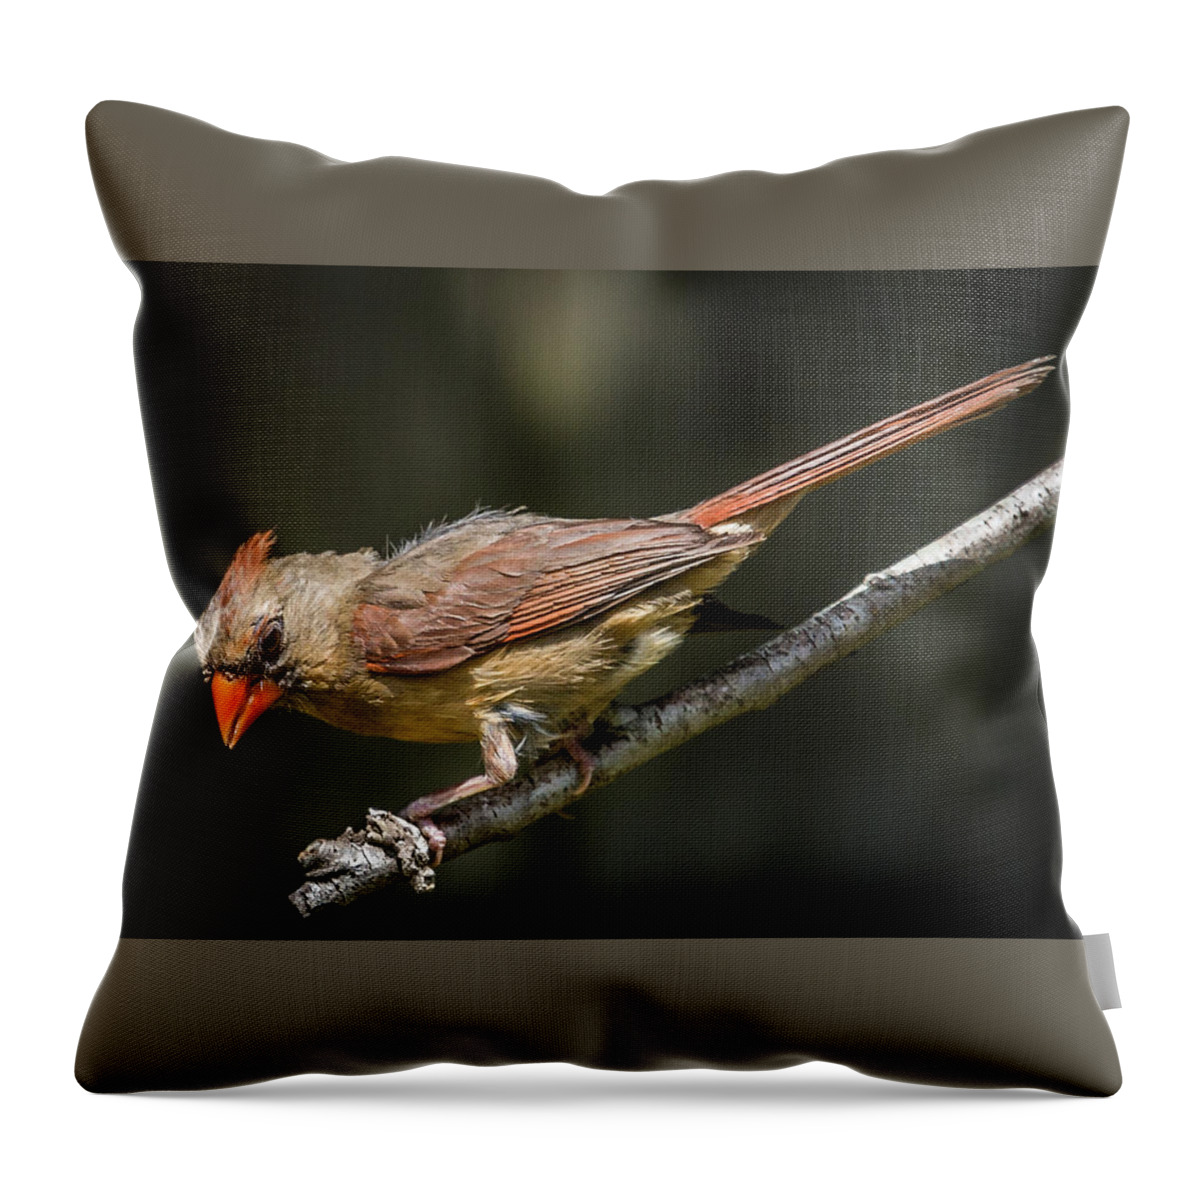  Throw Pillow featuring the photograph The Wet Look by Gregory Daley MPSA